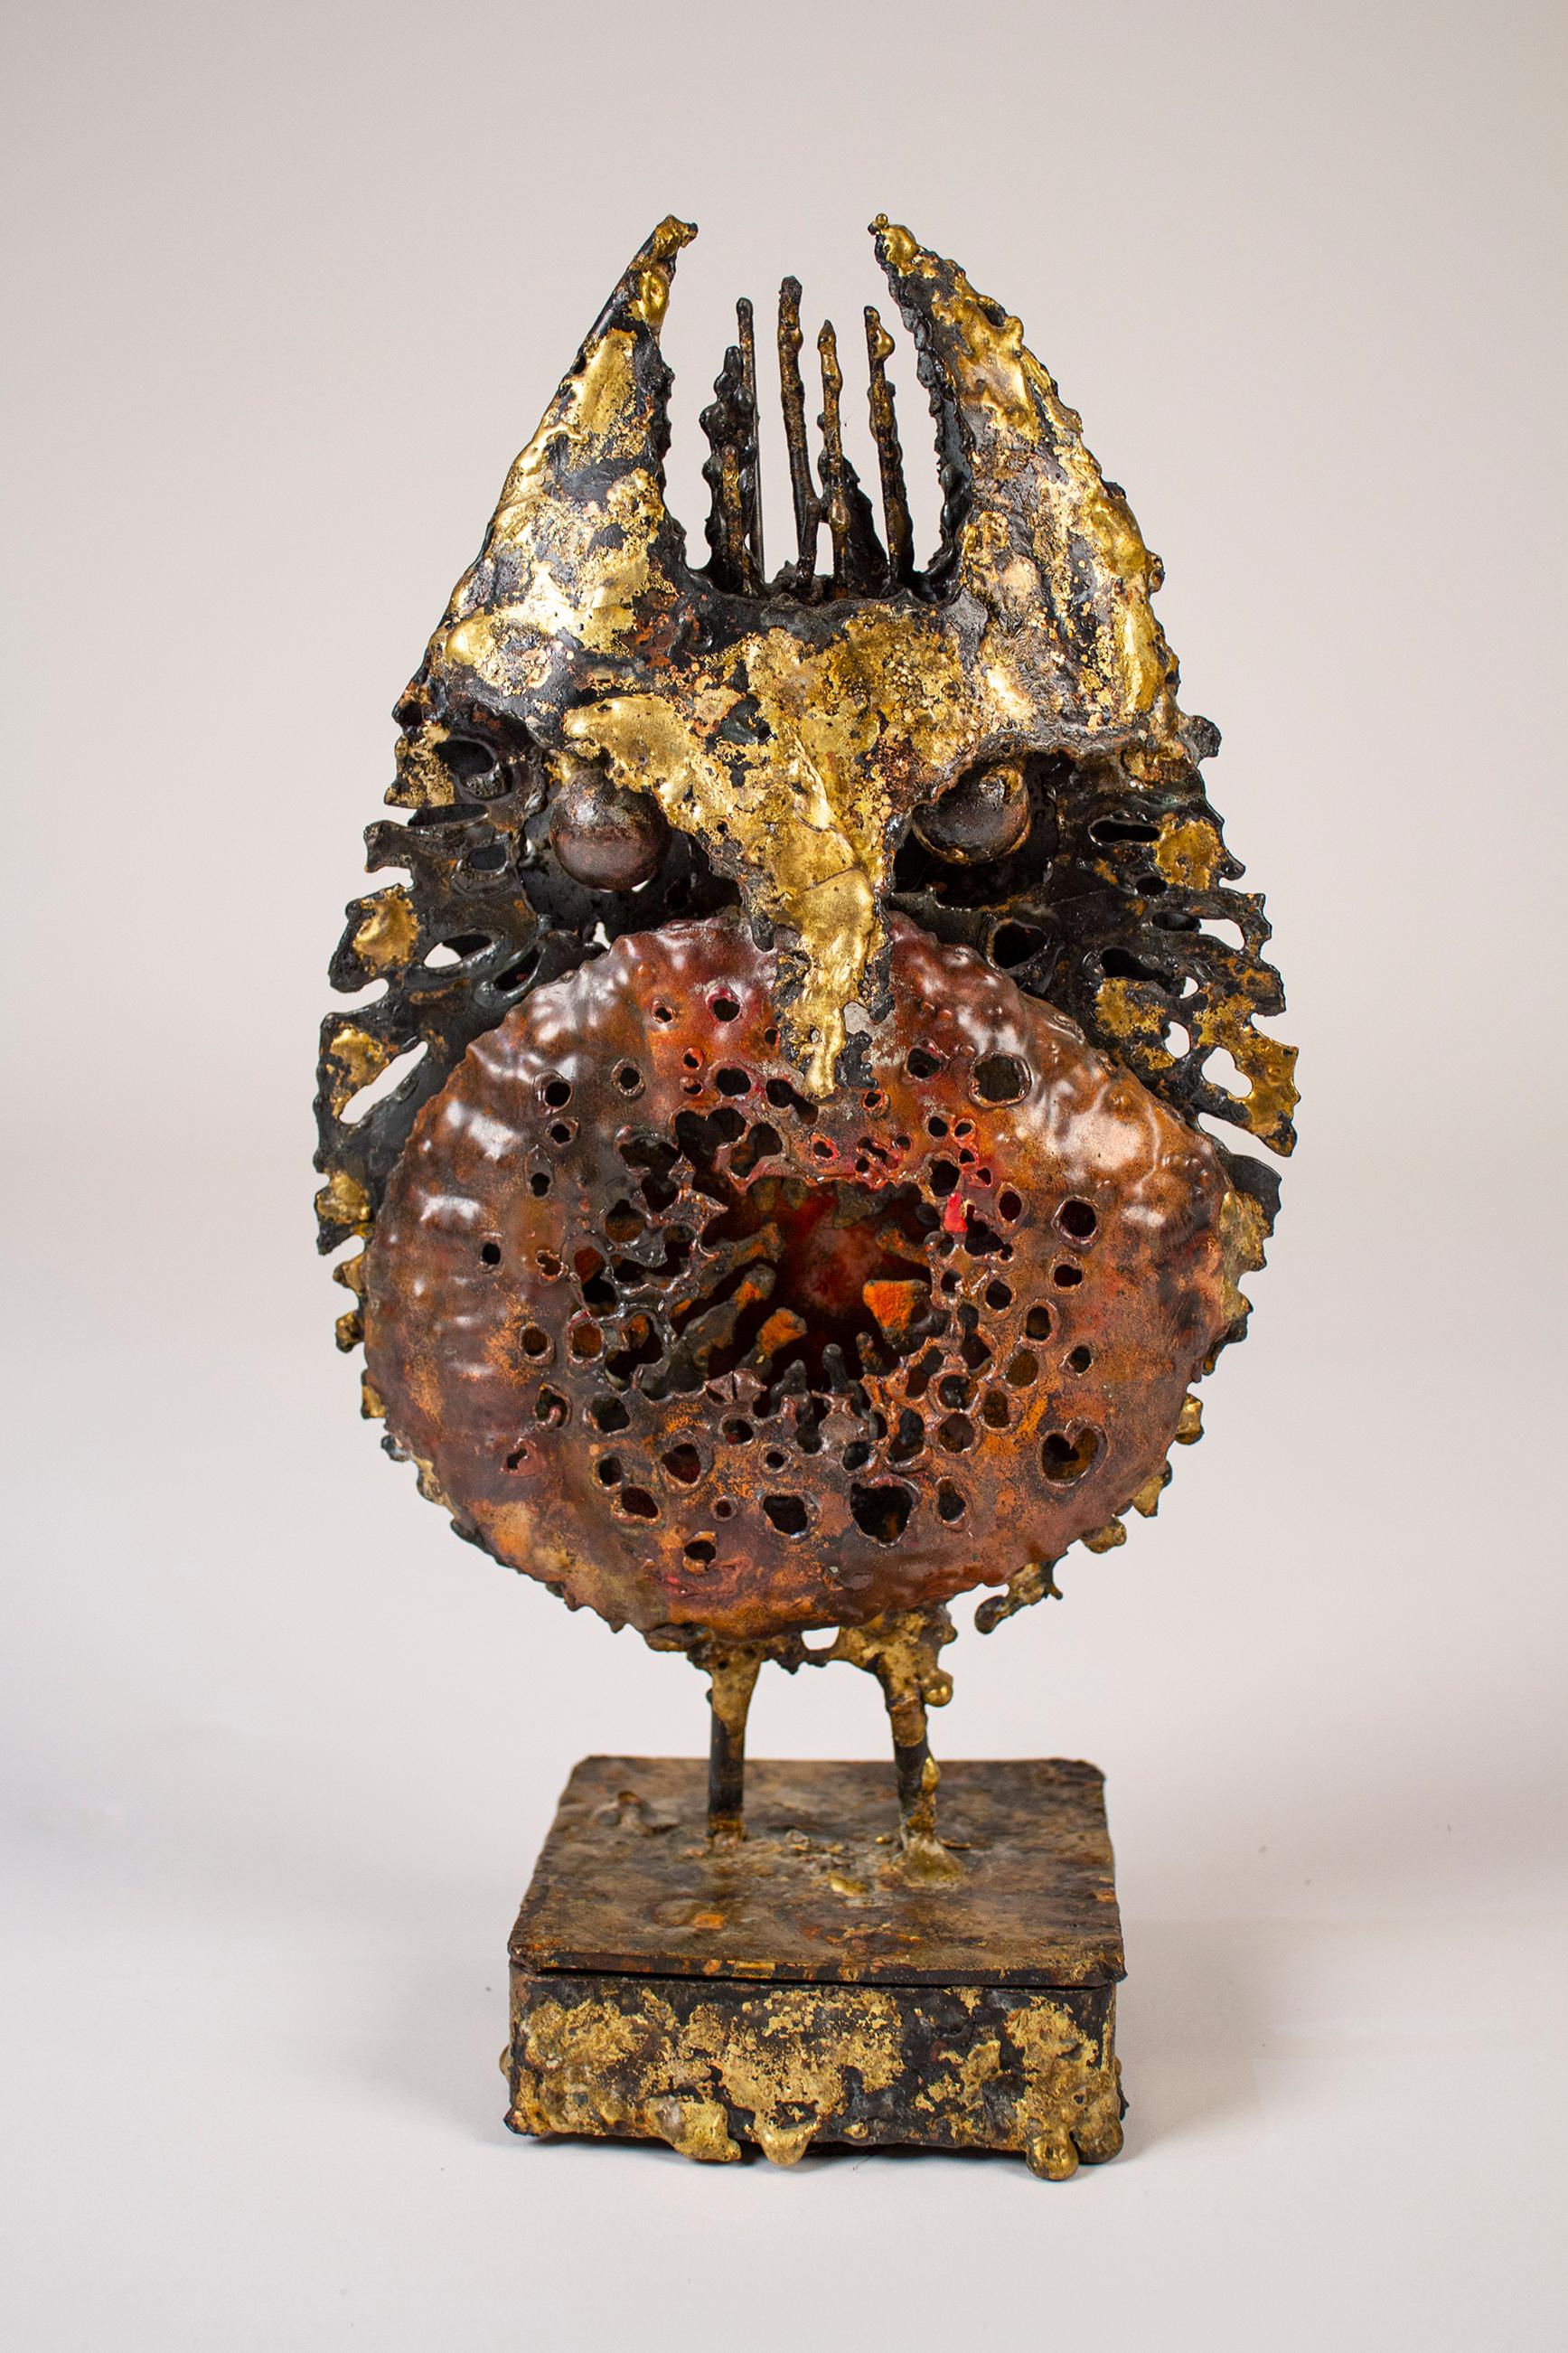 Amazing brutalist owl sculpture with felt lined stash box hidden in the base by renowned Iowa abstract artist James Anthony Bearden from his Animal Series.